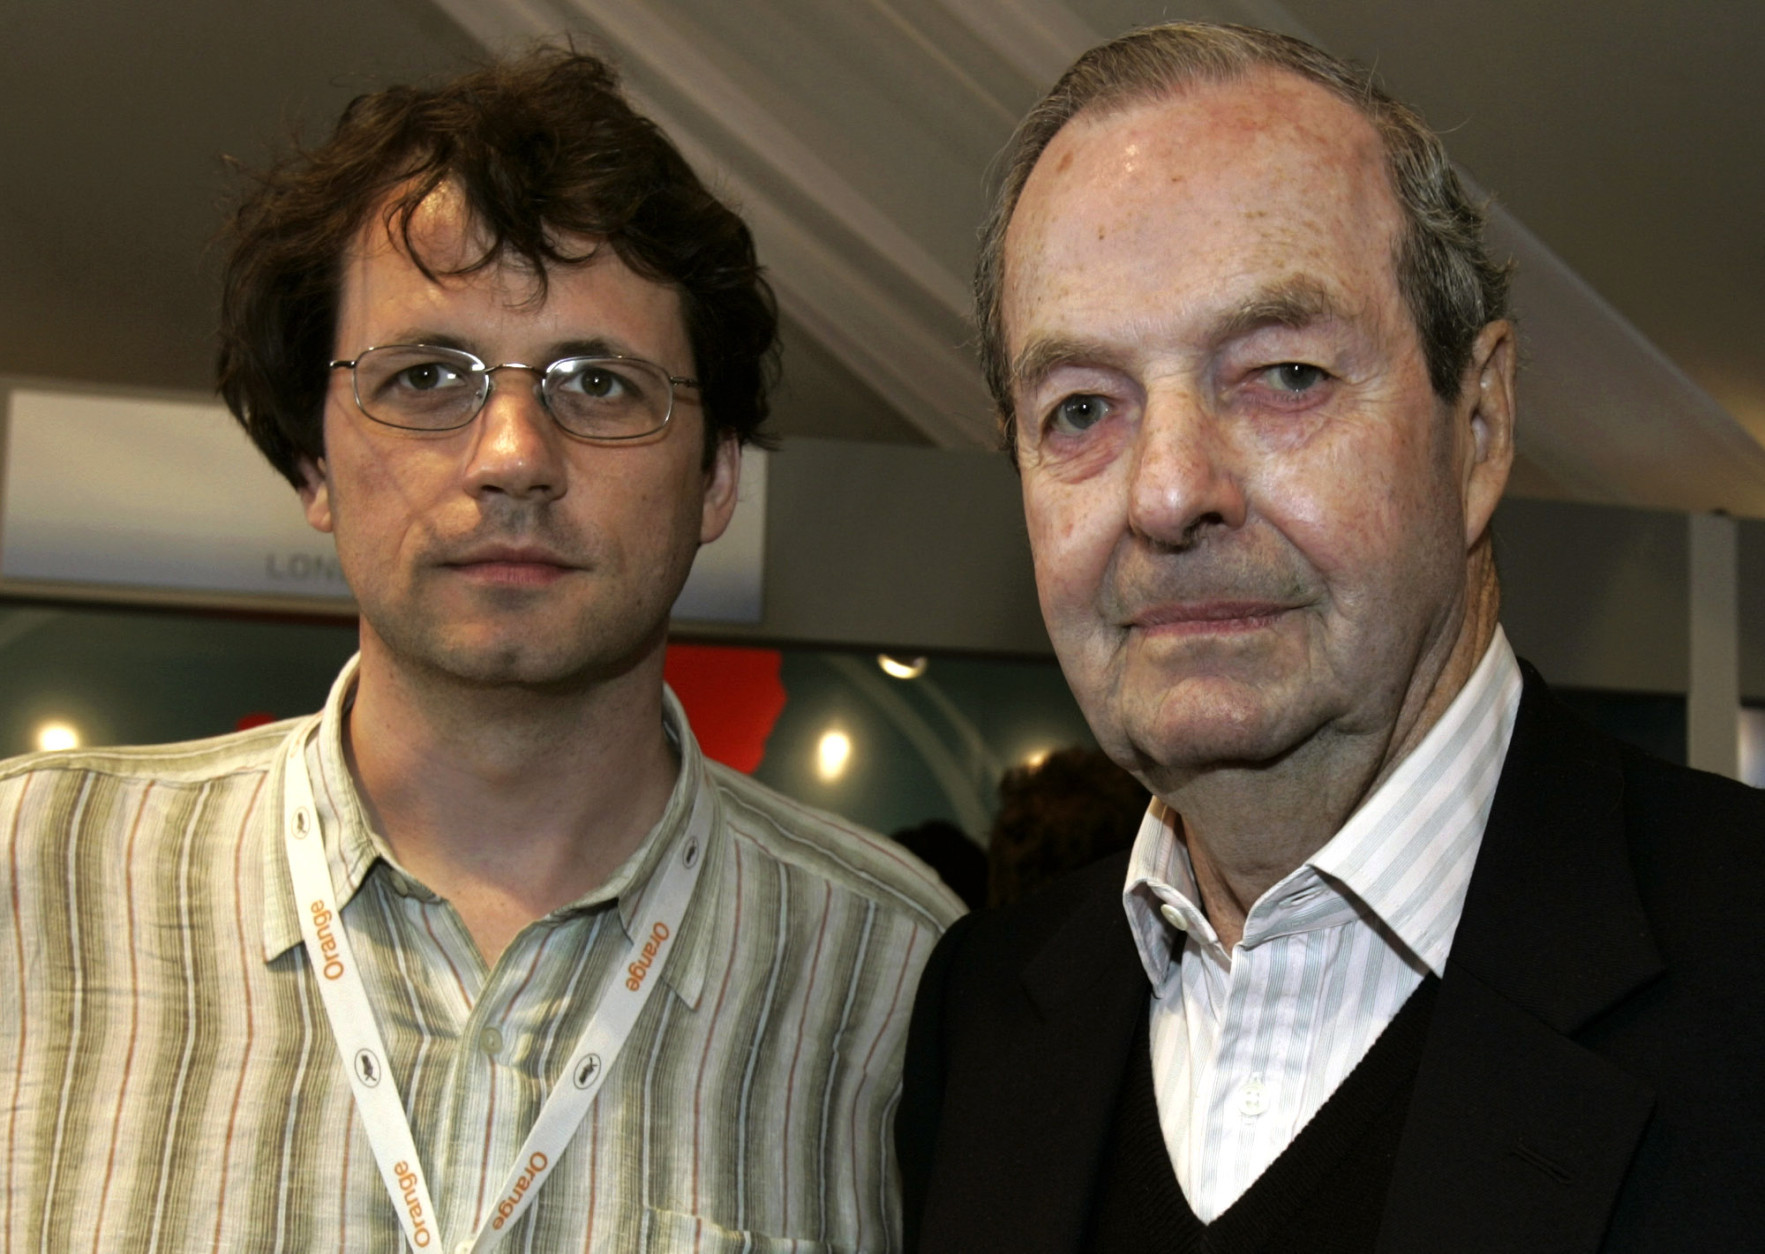 FILE In this file photo, dated Saturday May 14, 2005, Frederick Baker, the Anglo-Austrian director of "Shadowing The Third Man", left, and Britain's Guy Hamilton, director of four James Bond films, pose prior to their joint press conference at the 58th international Cannes film festival in Cannes, southern France. A hospital on his home island of Mallorca said he died aged 93 on Wednesday April 20, 2016. (AP Photo/Michel Euler, FILE)